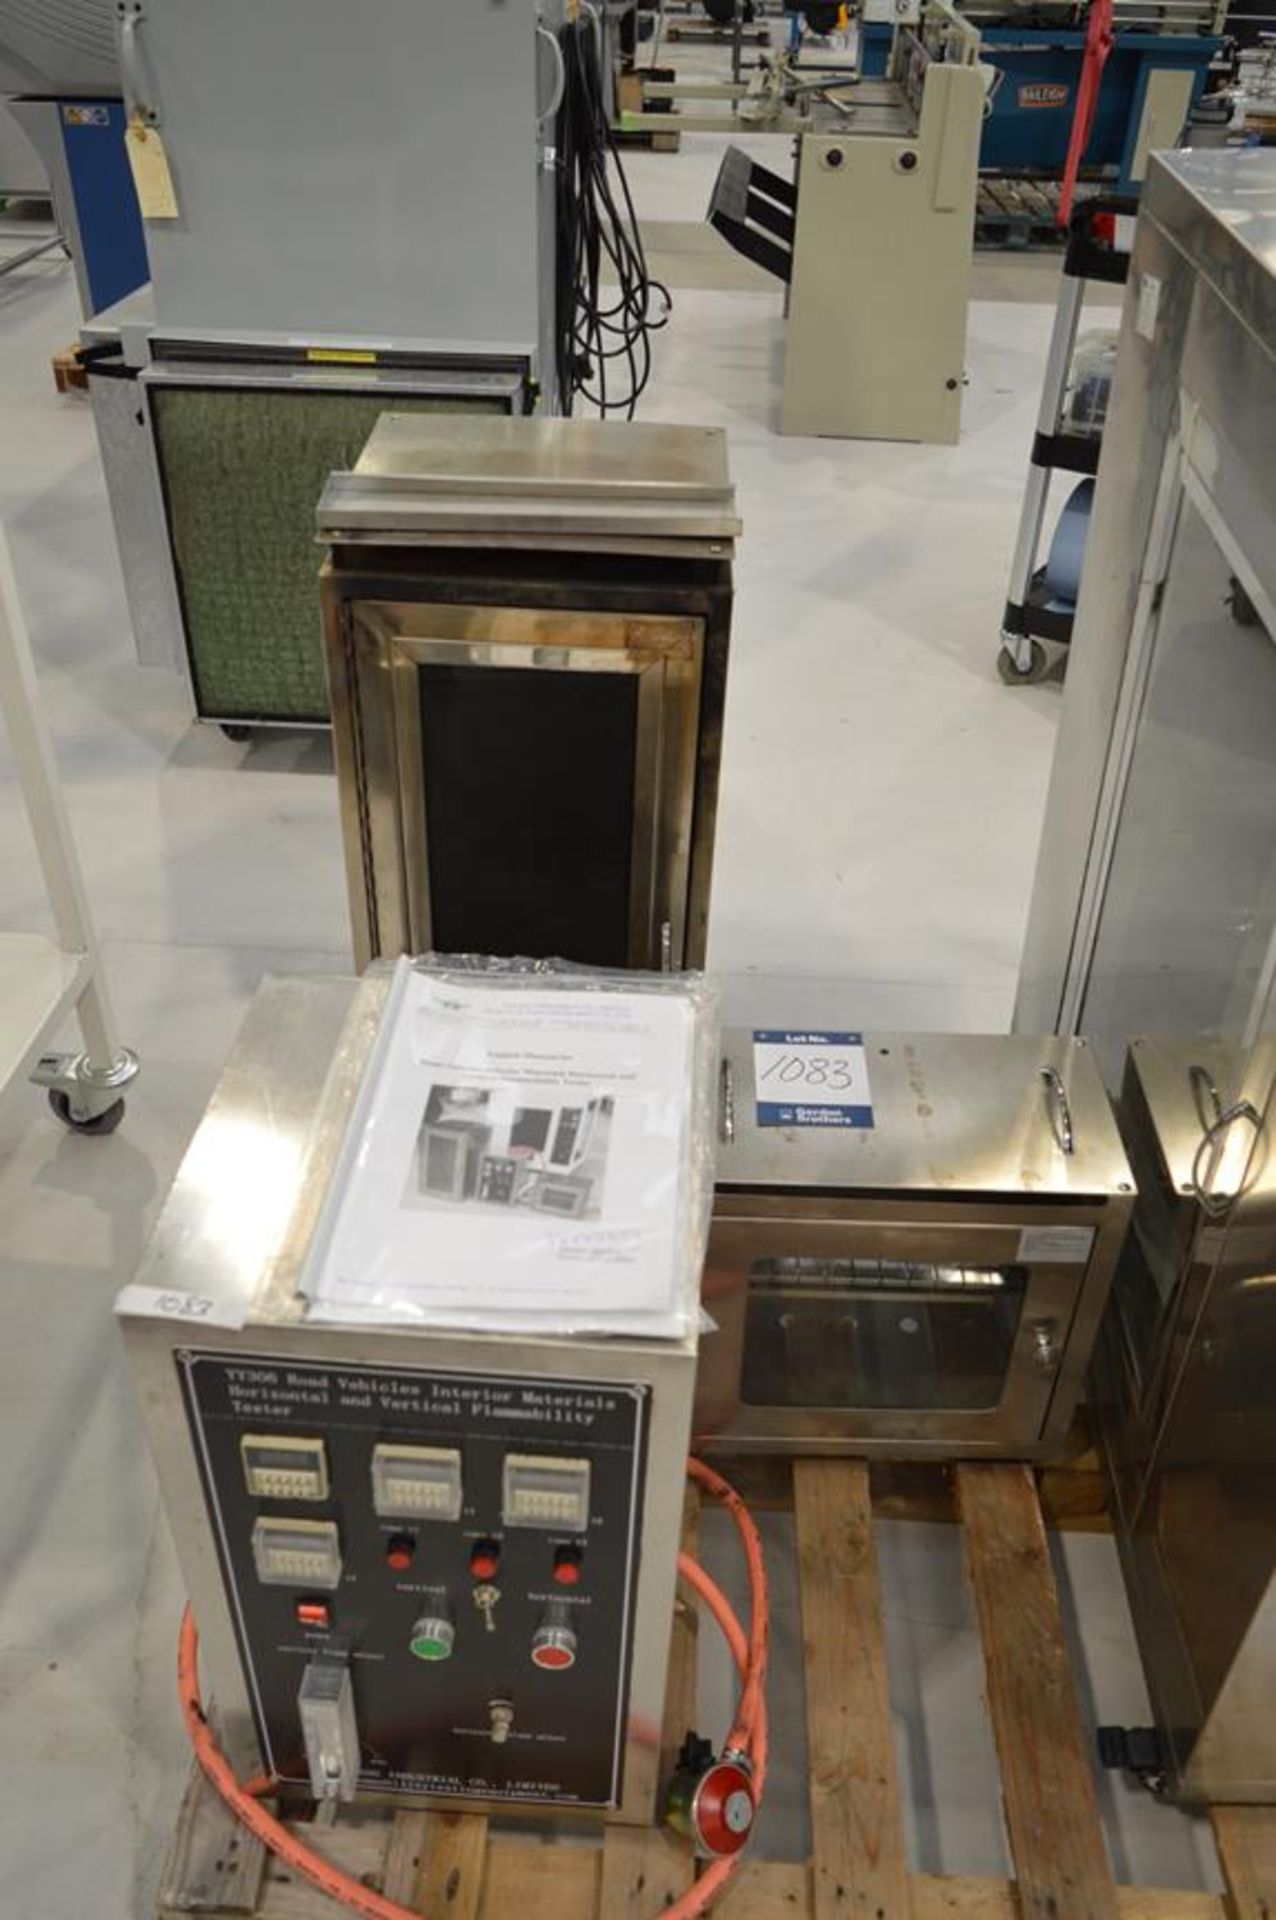 Stainless steel test cabinet with YY306 vehicle material test controller - Image 2 of 6